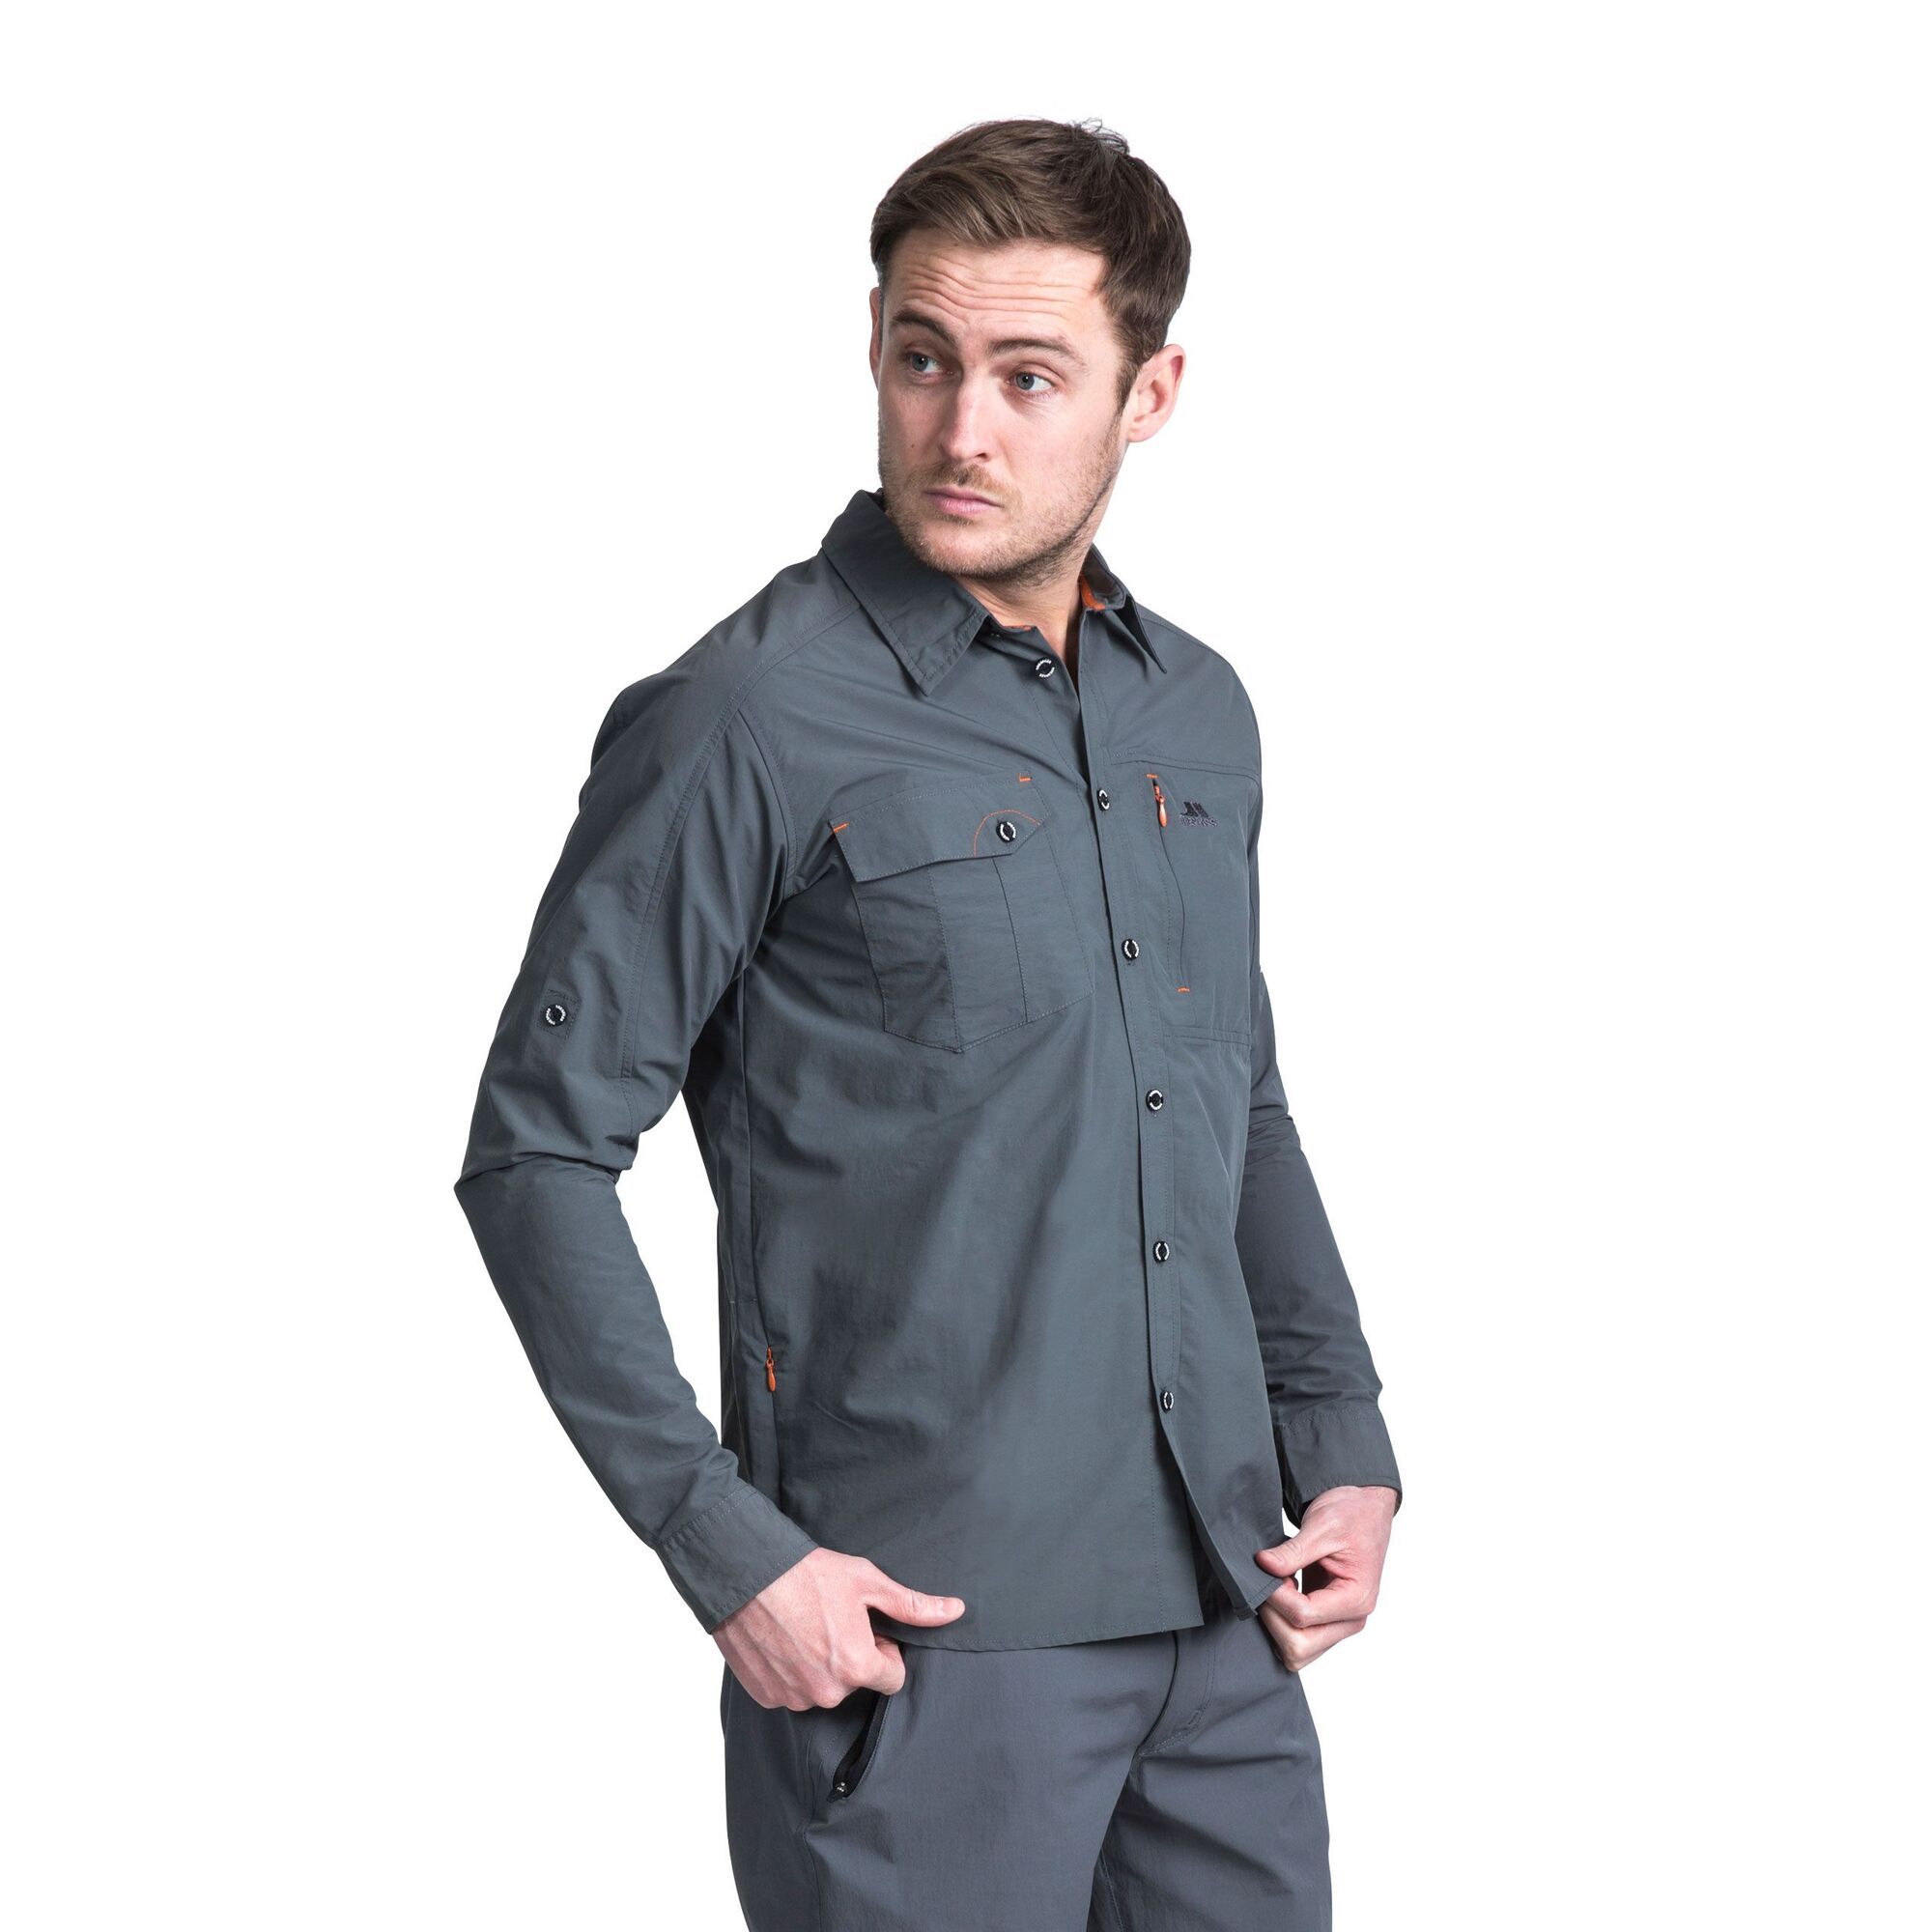 2 piece collar. Long, roll-up sleeves. Button fastening. Chest patch pocket. Zip chest pocket. Concealed zip pocket. Mesh lined vent. Quick dry. UV 40+. Mosquito repellent finish. 100% Polyamide. Trespass Mens Chest Sizing (approx): S - 35-37in/89-94cm, M - 38-40in/96.5-101.5cm, L - 41-43in/104-109cm, XL - 44-46in/111.5-117cm, XXL - 46-48in/117-122cm, 3XL - 48-50in/122-127cm.